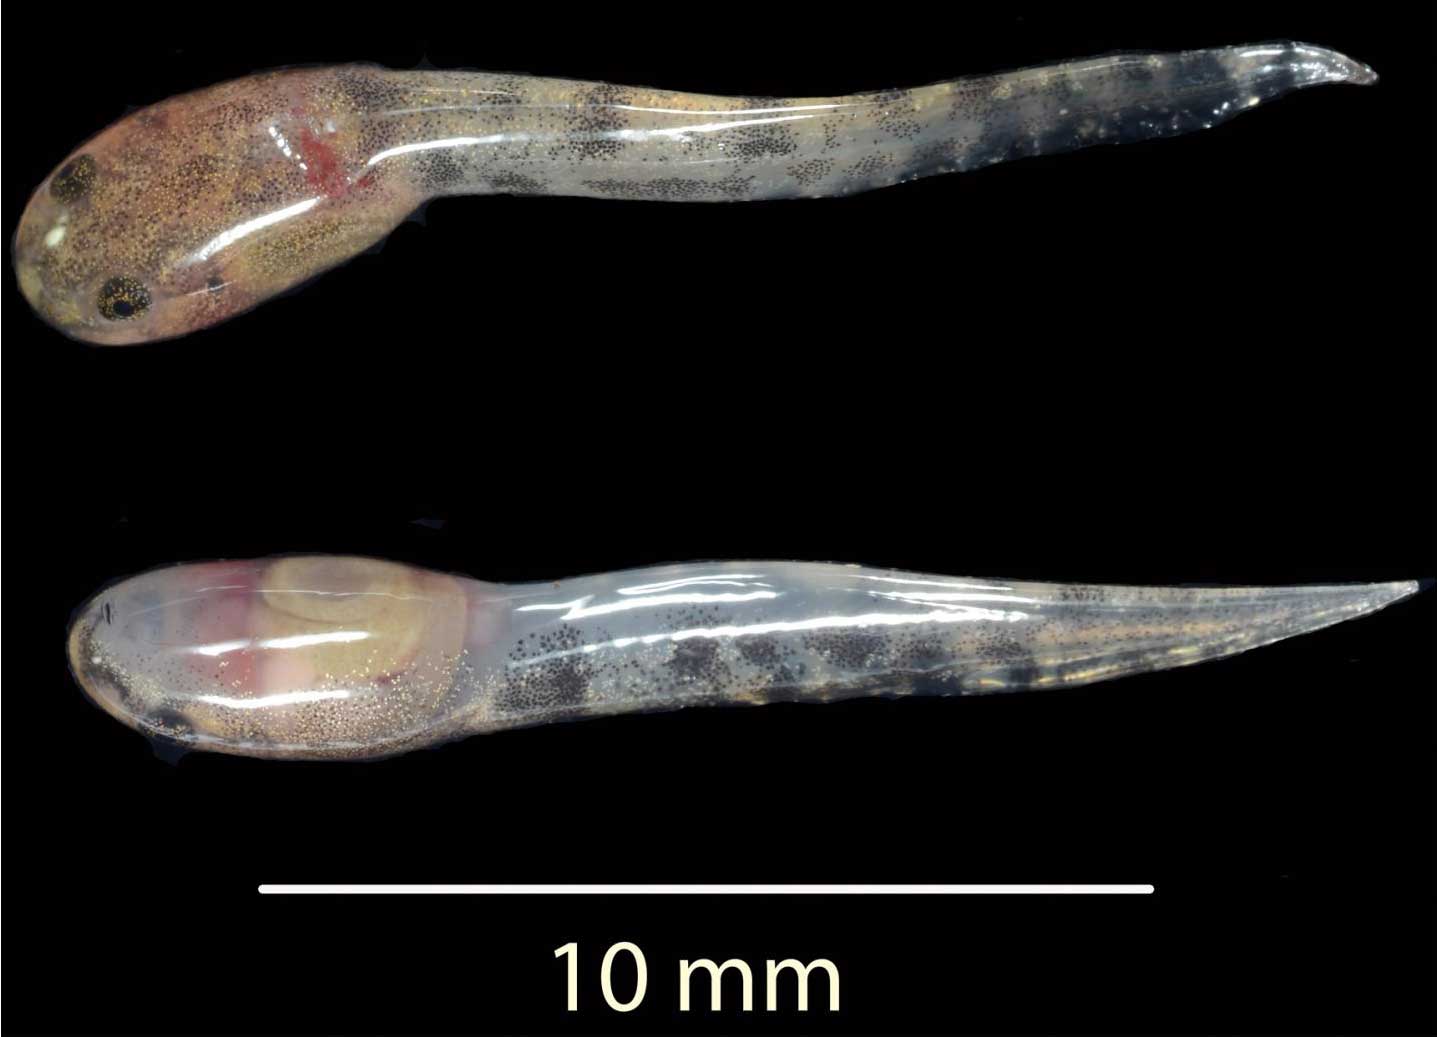 Two tadpoles, each about 10 millimeters long, shortly after birth.